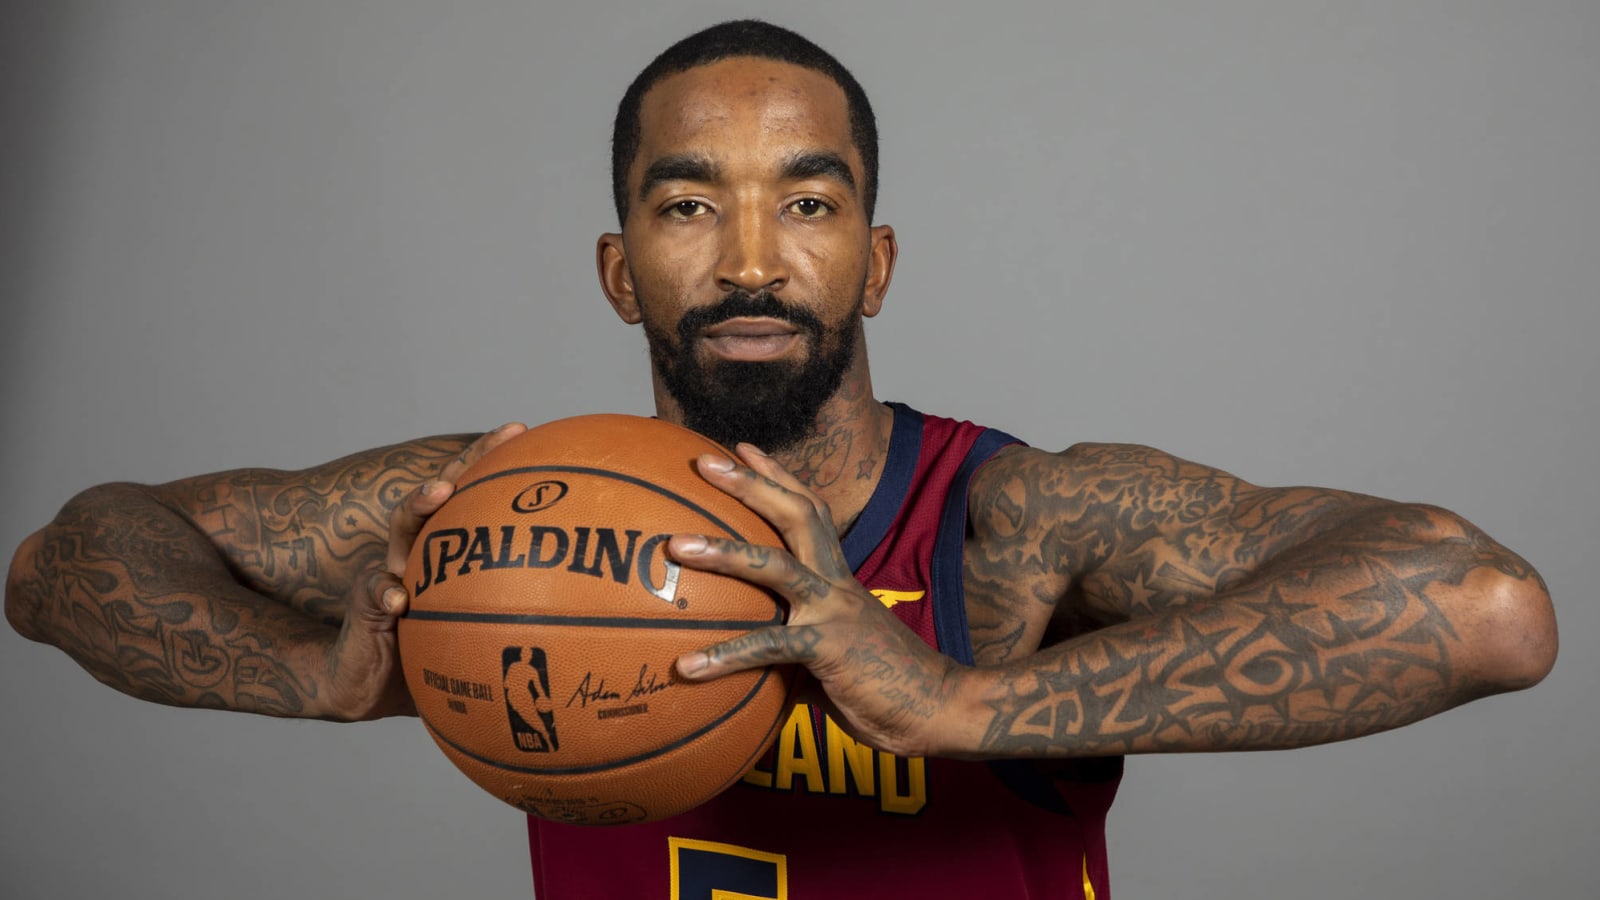 Video shows JR Smith beating man who smashed his car during protests